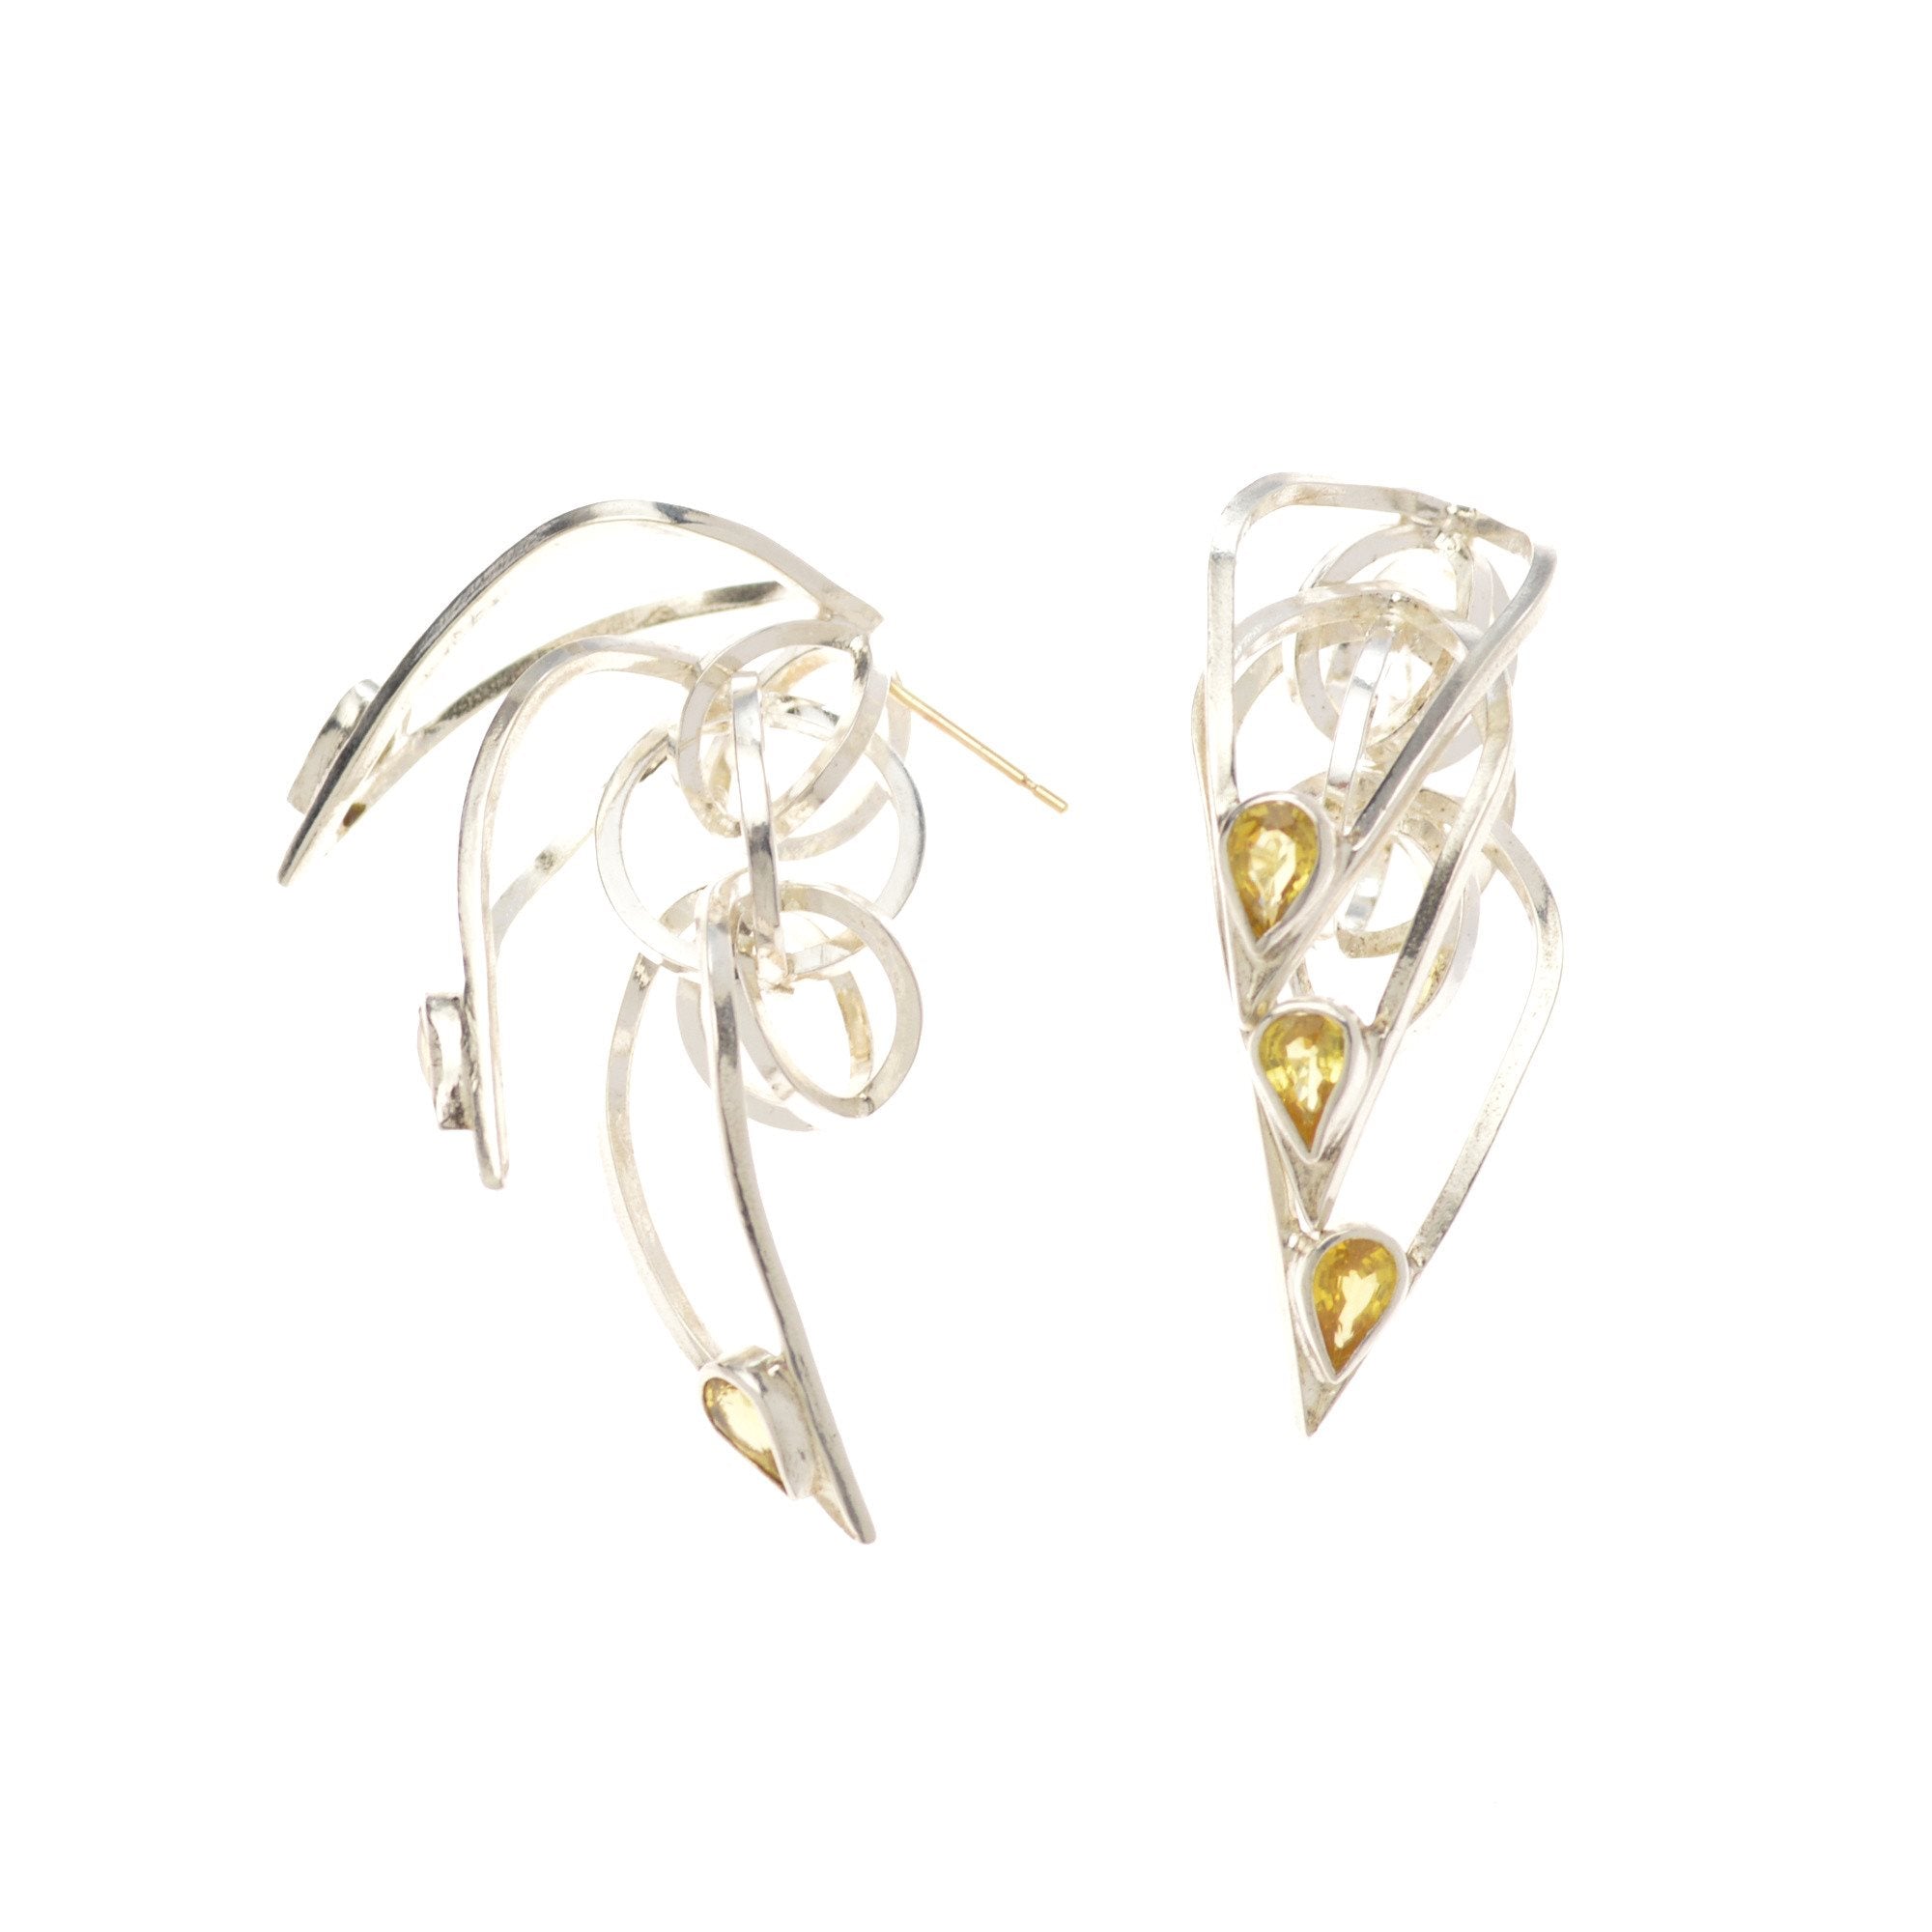 Tighra Earrings in Sterling Silver, Yellow Sapphires